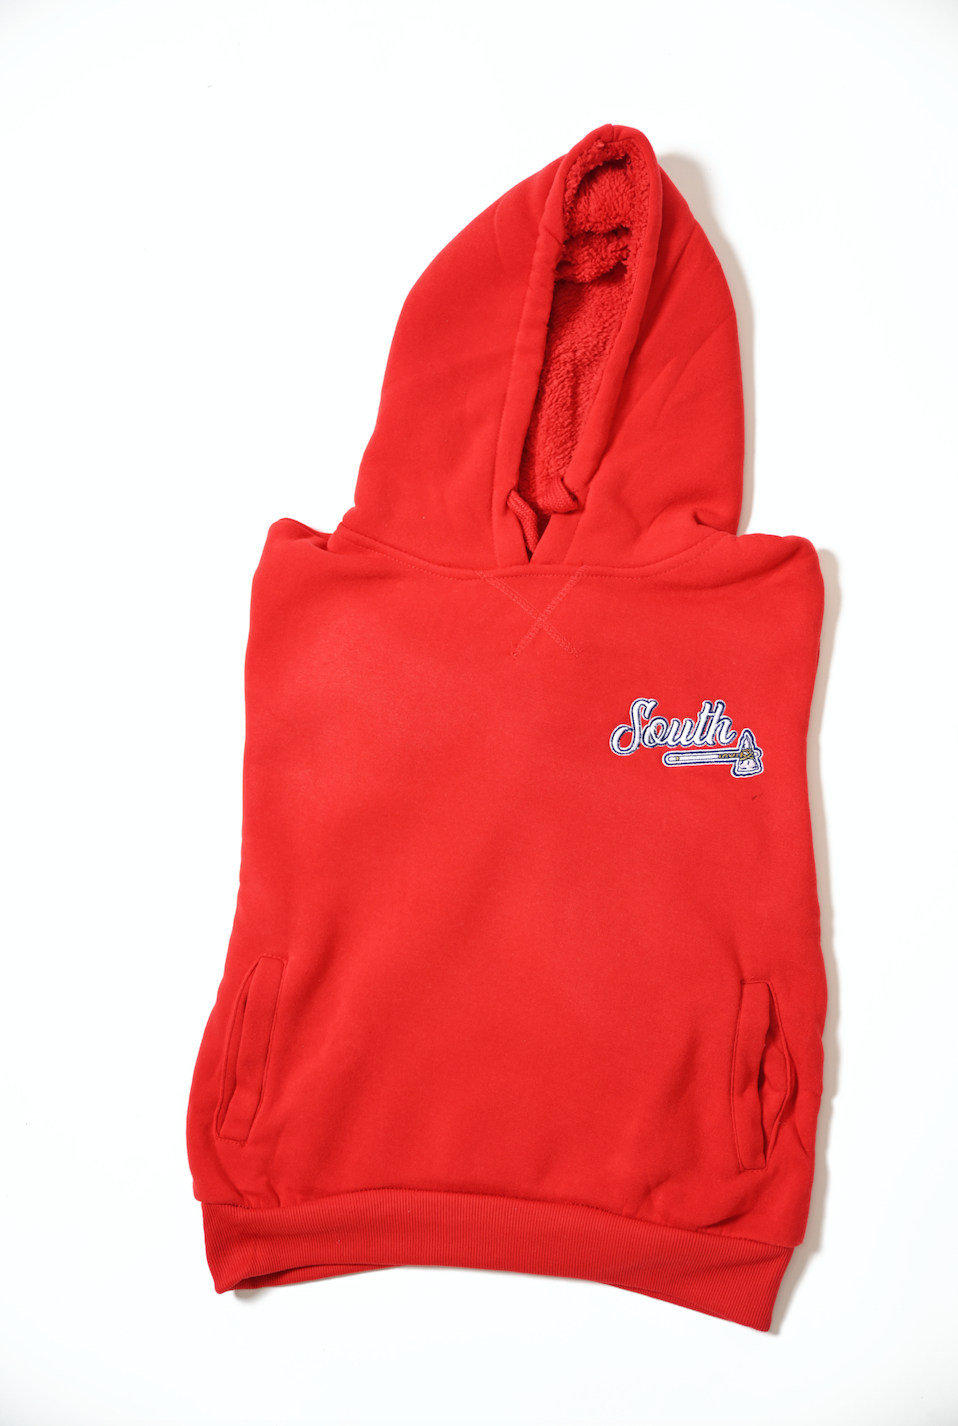 Embroidered Women Tomahawk Hoodie - Red